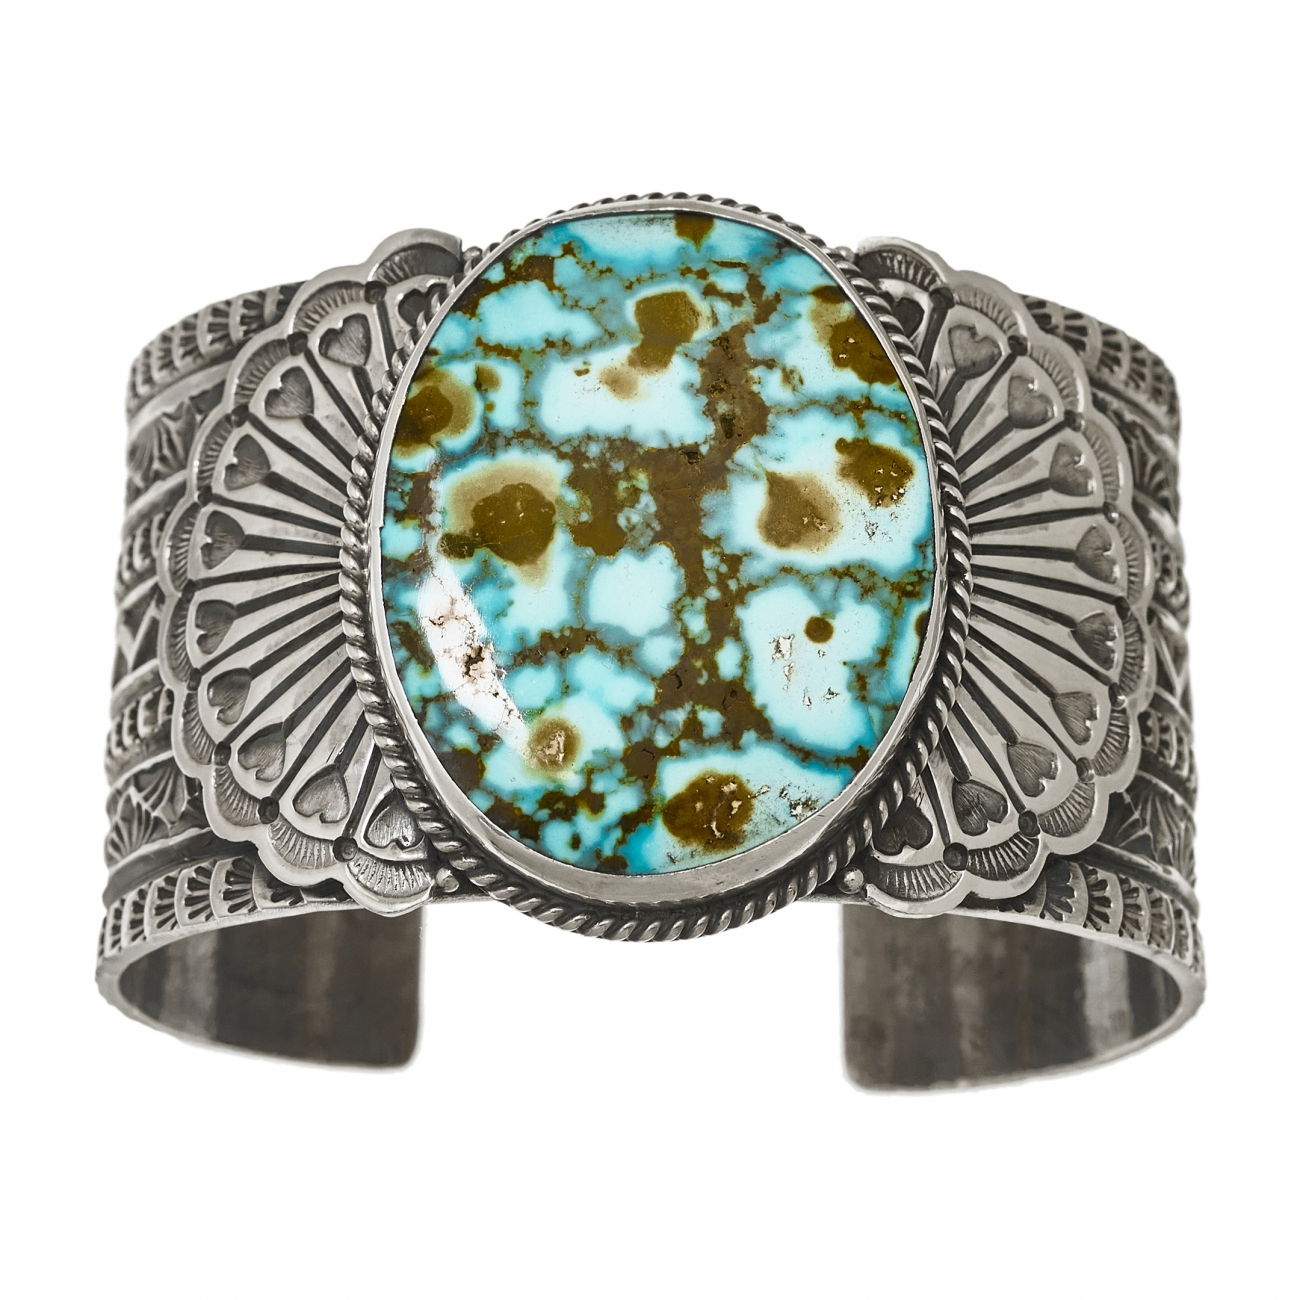 Women cuff bracelet BR778 in turquoise and silver - Harpo Paris